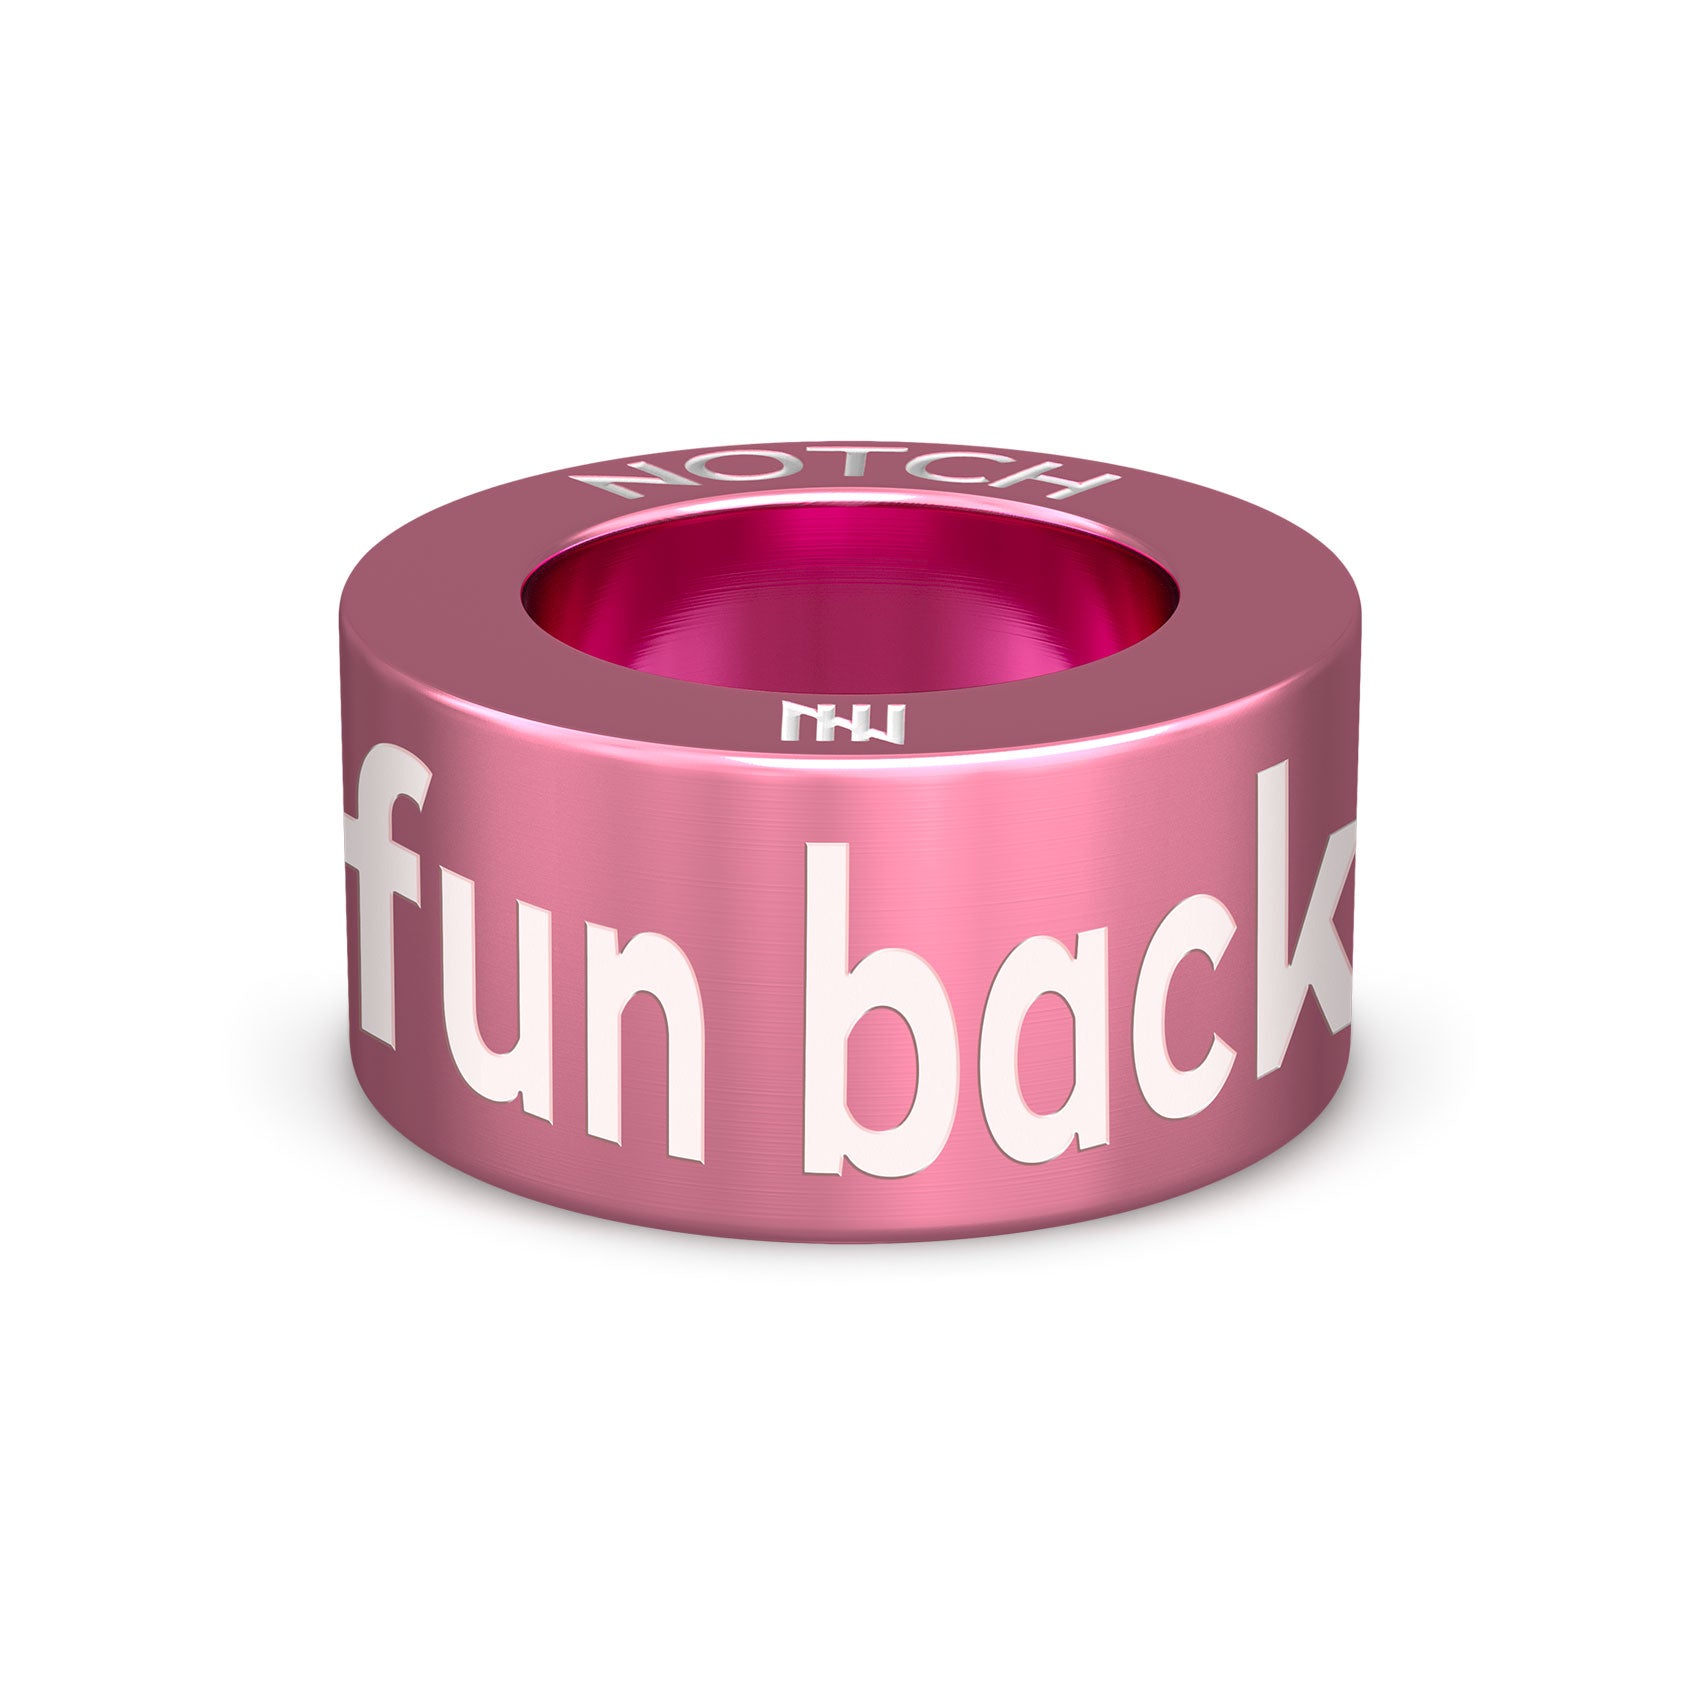 Get your fun back NOTCH Charm (Pink)